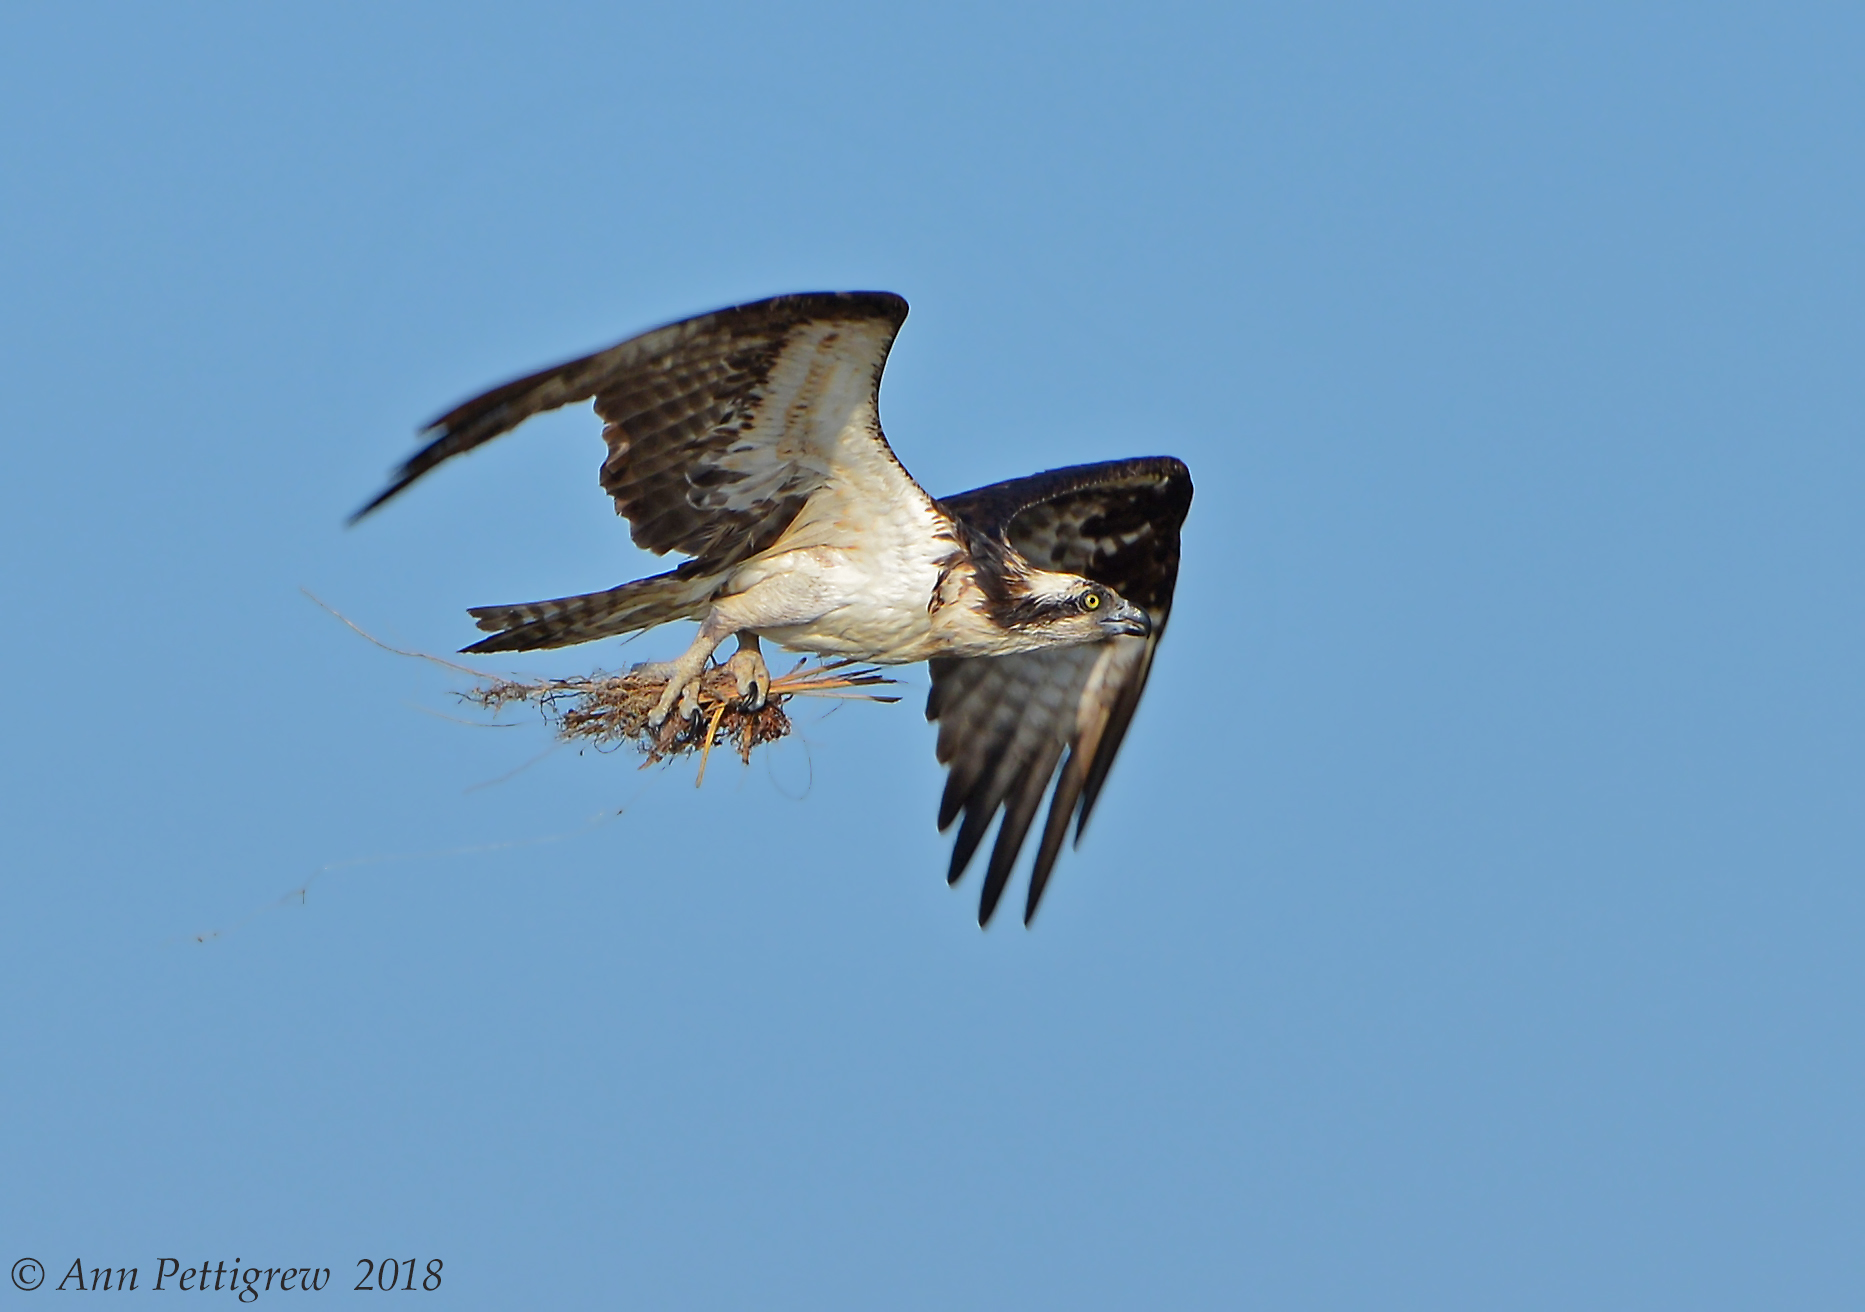 Osprey with Nesting Material